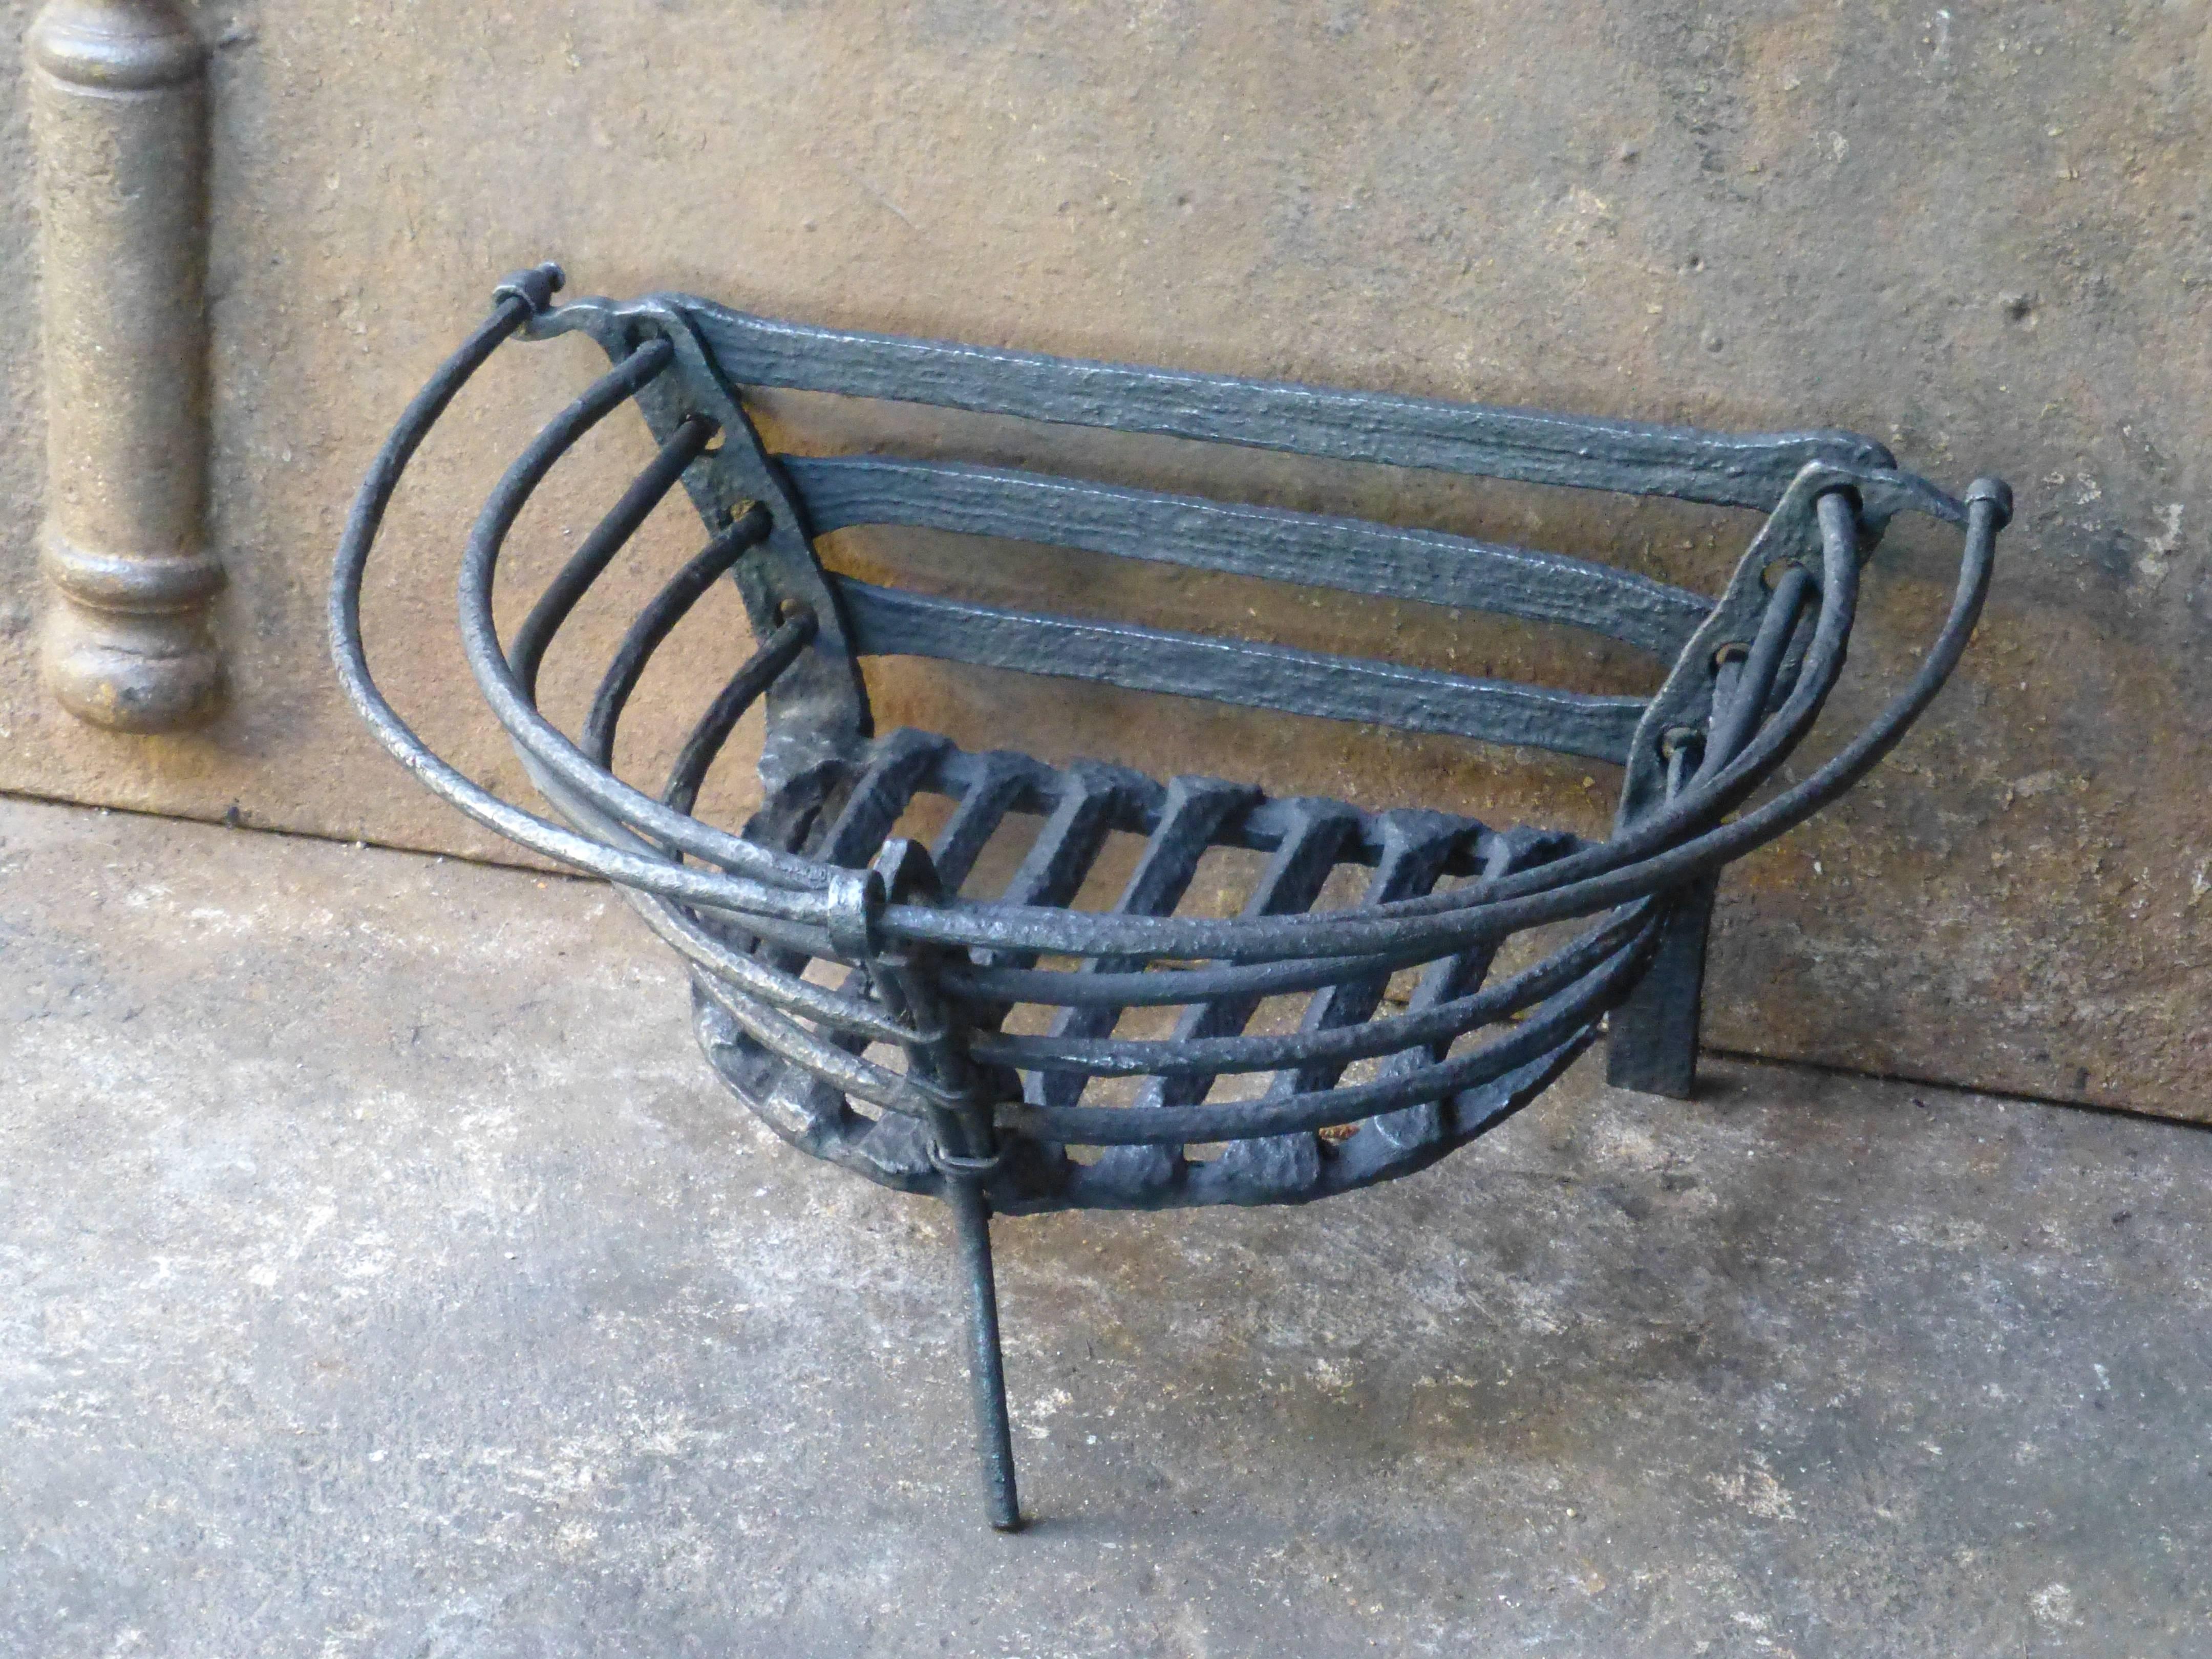 18th century English fire grate - fireplace basket made of wrought iron.